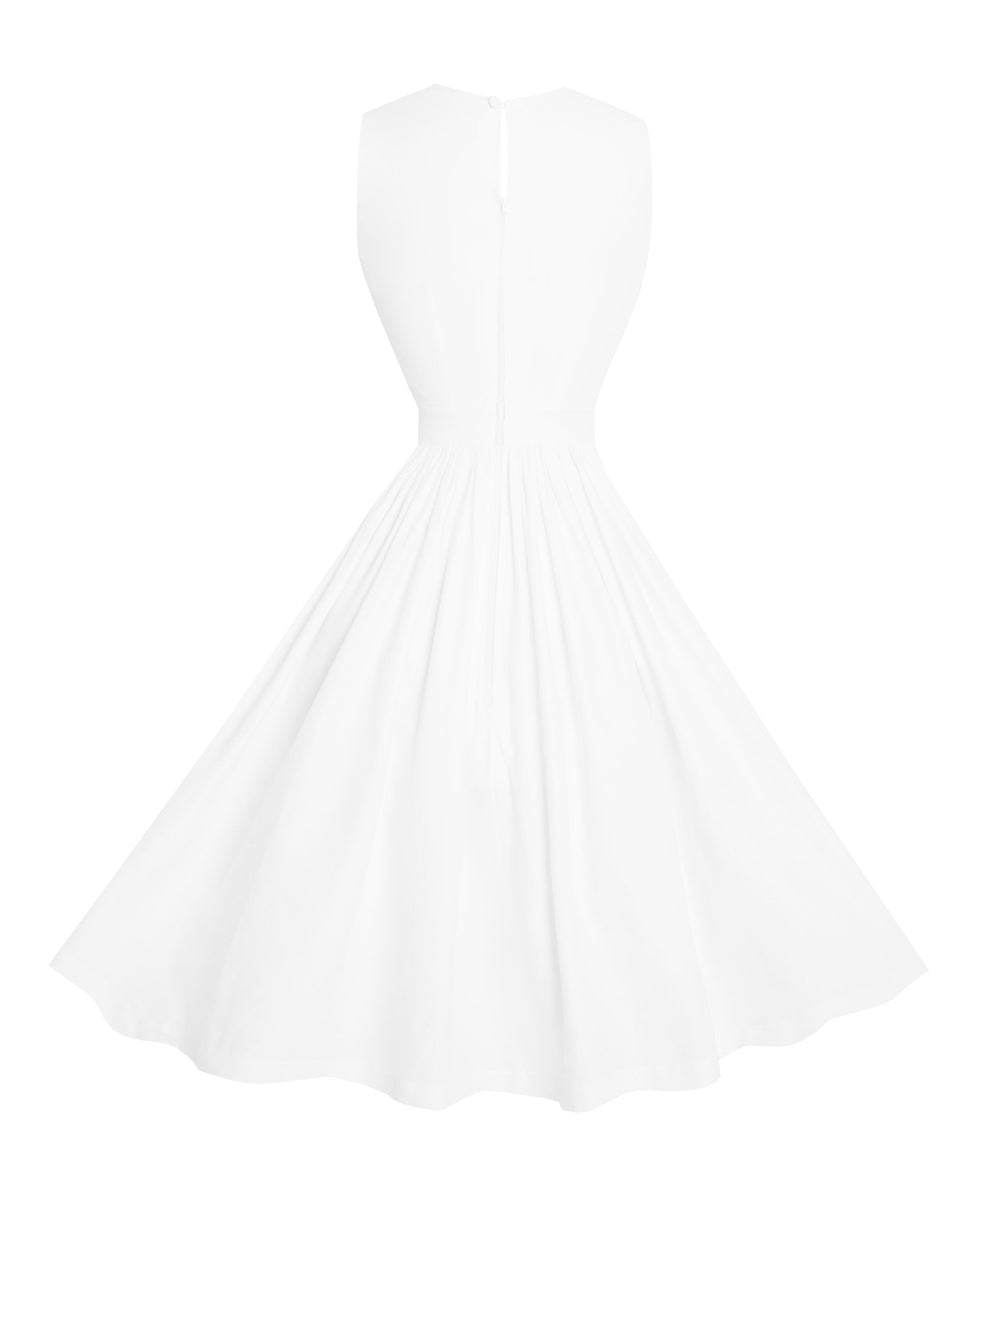 RTS - Size S - Clarence Dress in White Cotton